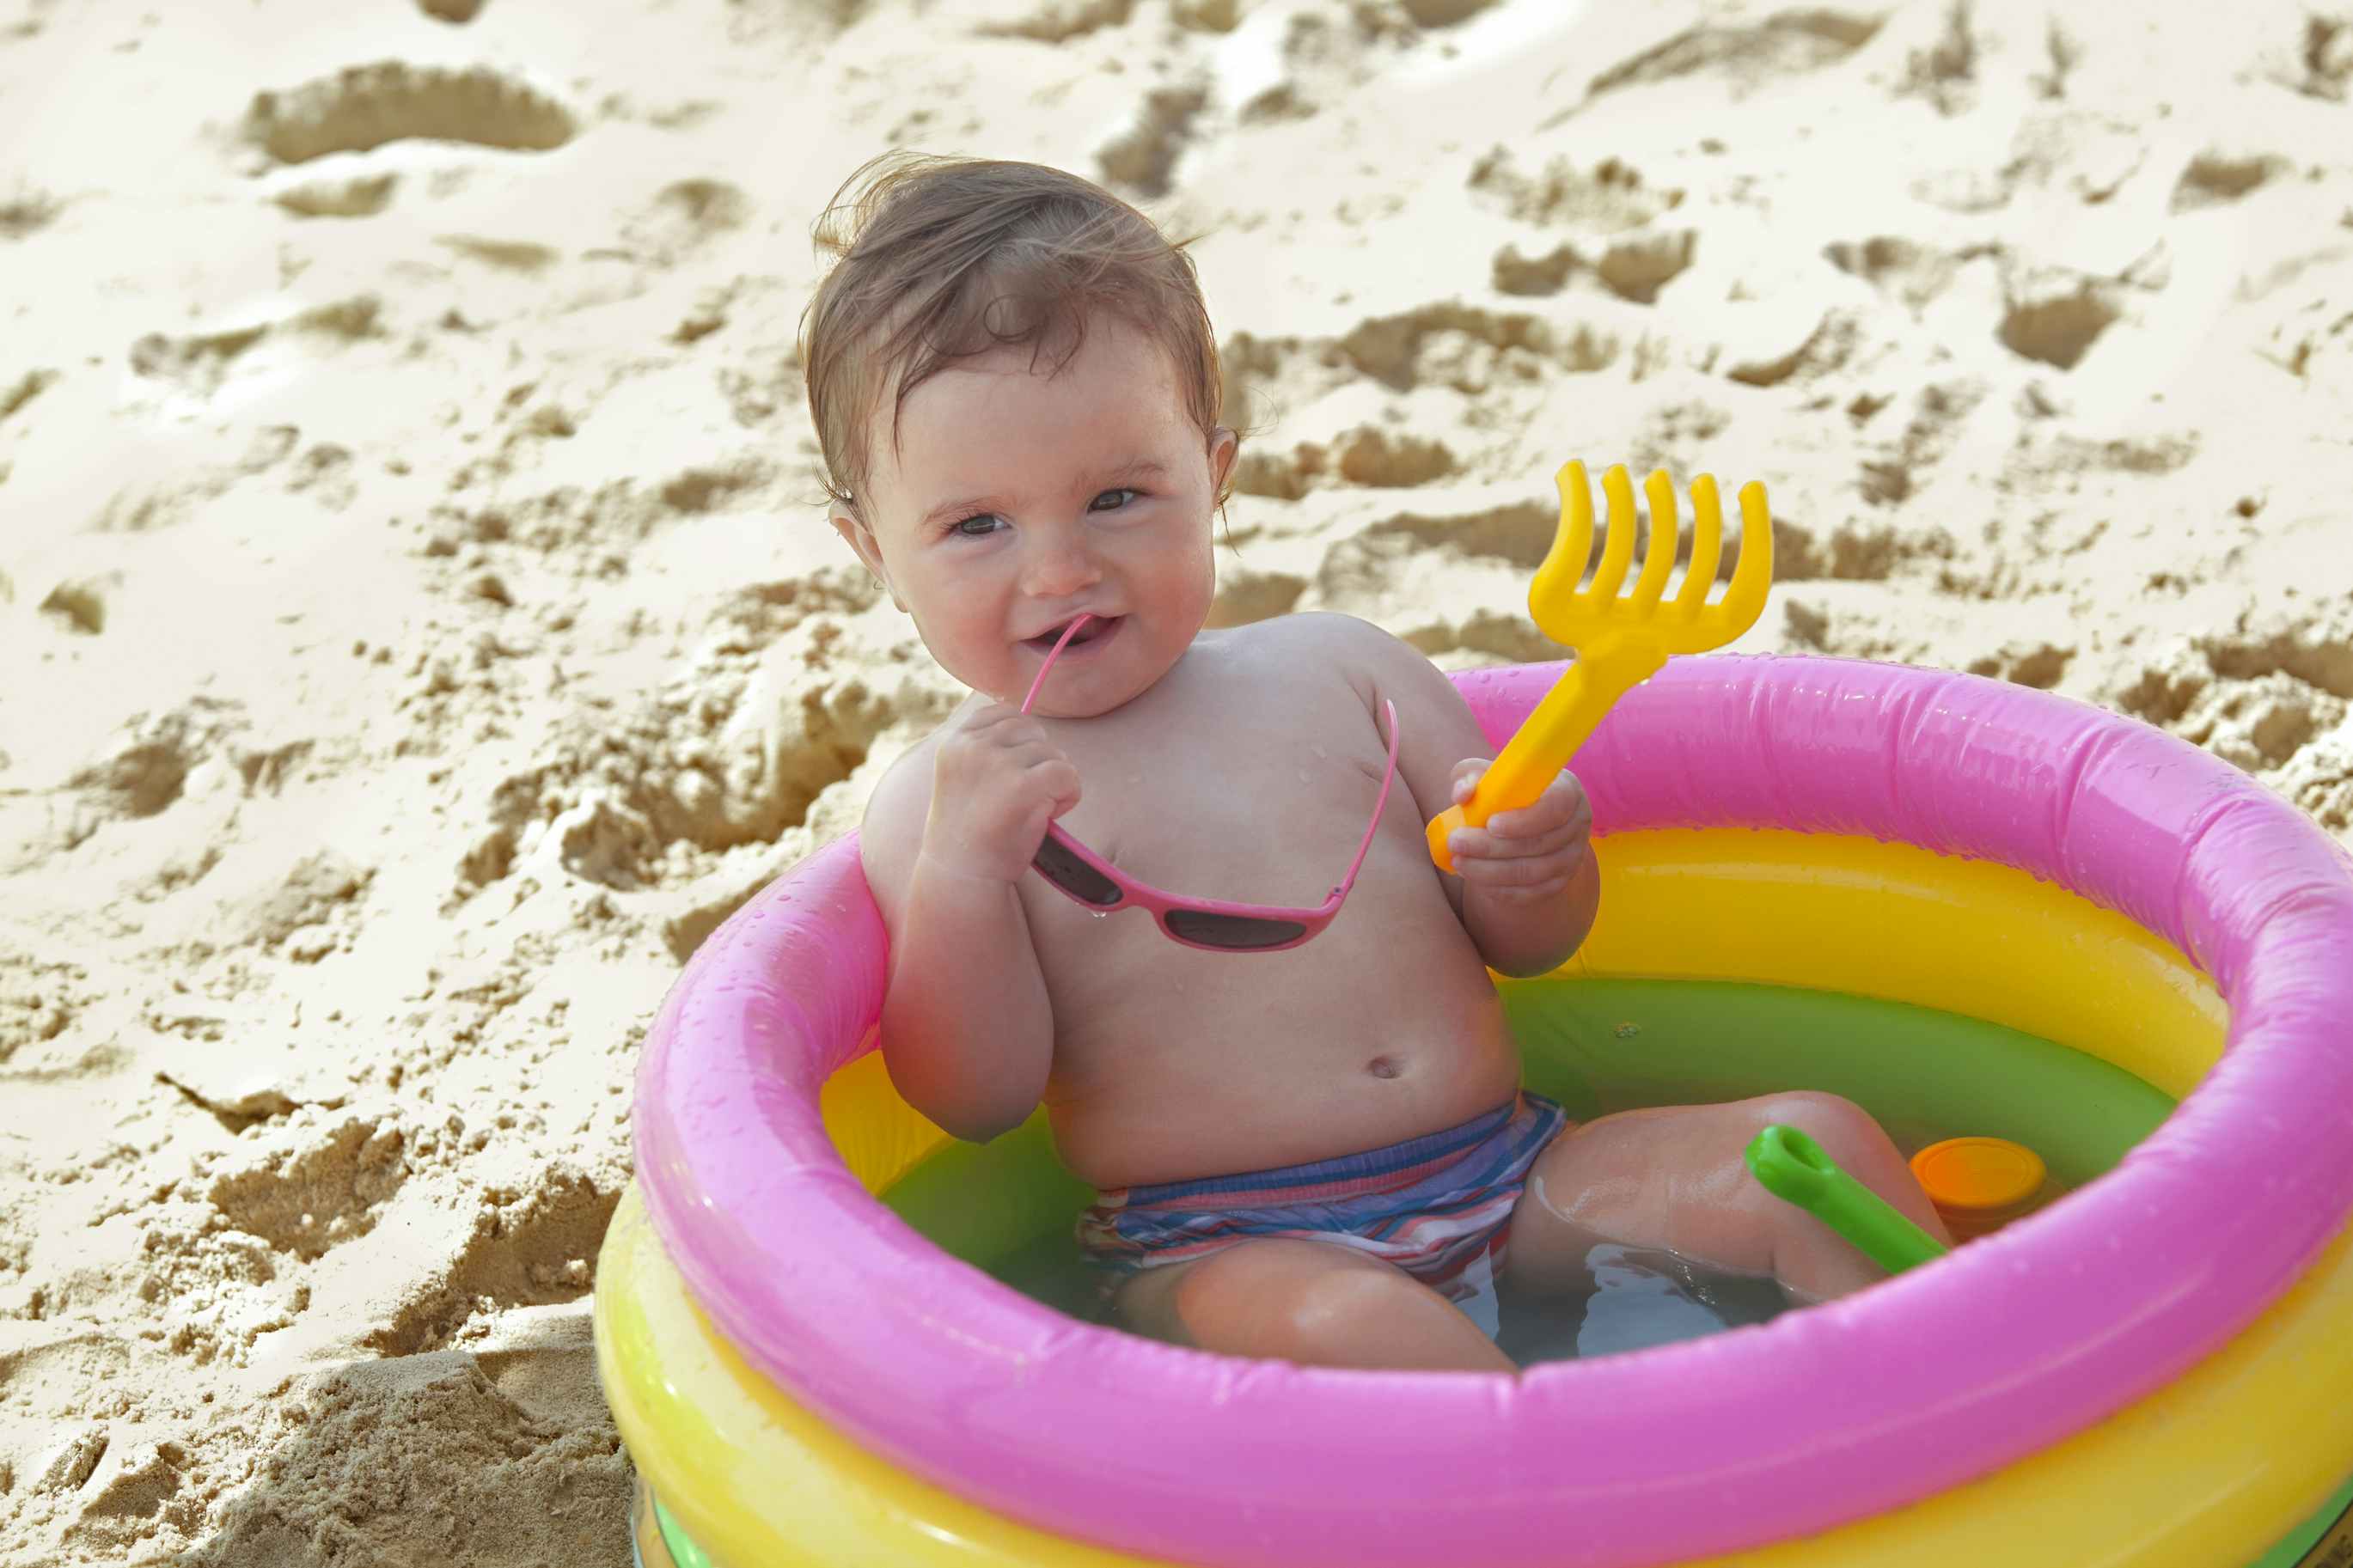 Baby sits inside a kiddie pool at the beach. The baby is holding a plastic toy and a pair of sunglasses